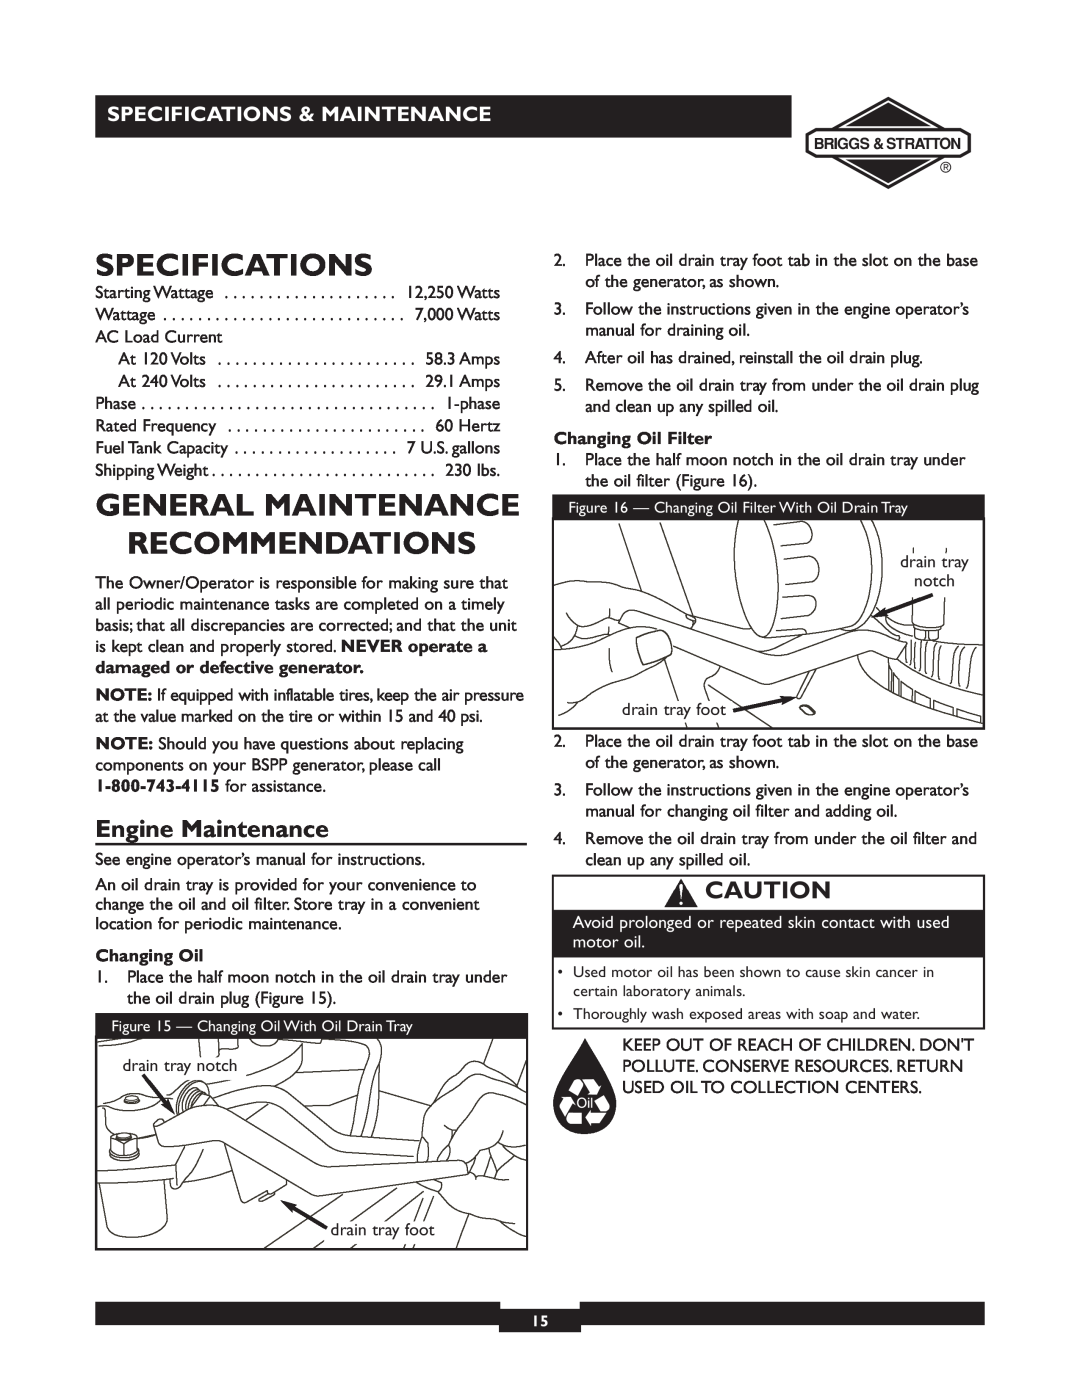 Briggs & Stratton 01894-1 manual Specifications, General Maintenance Recommendations, Engine Maintenance, Changing Oil 